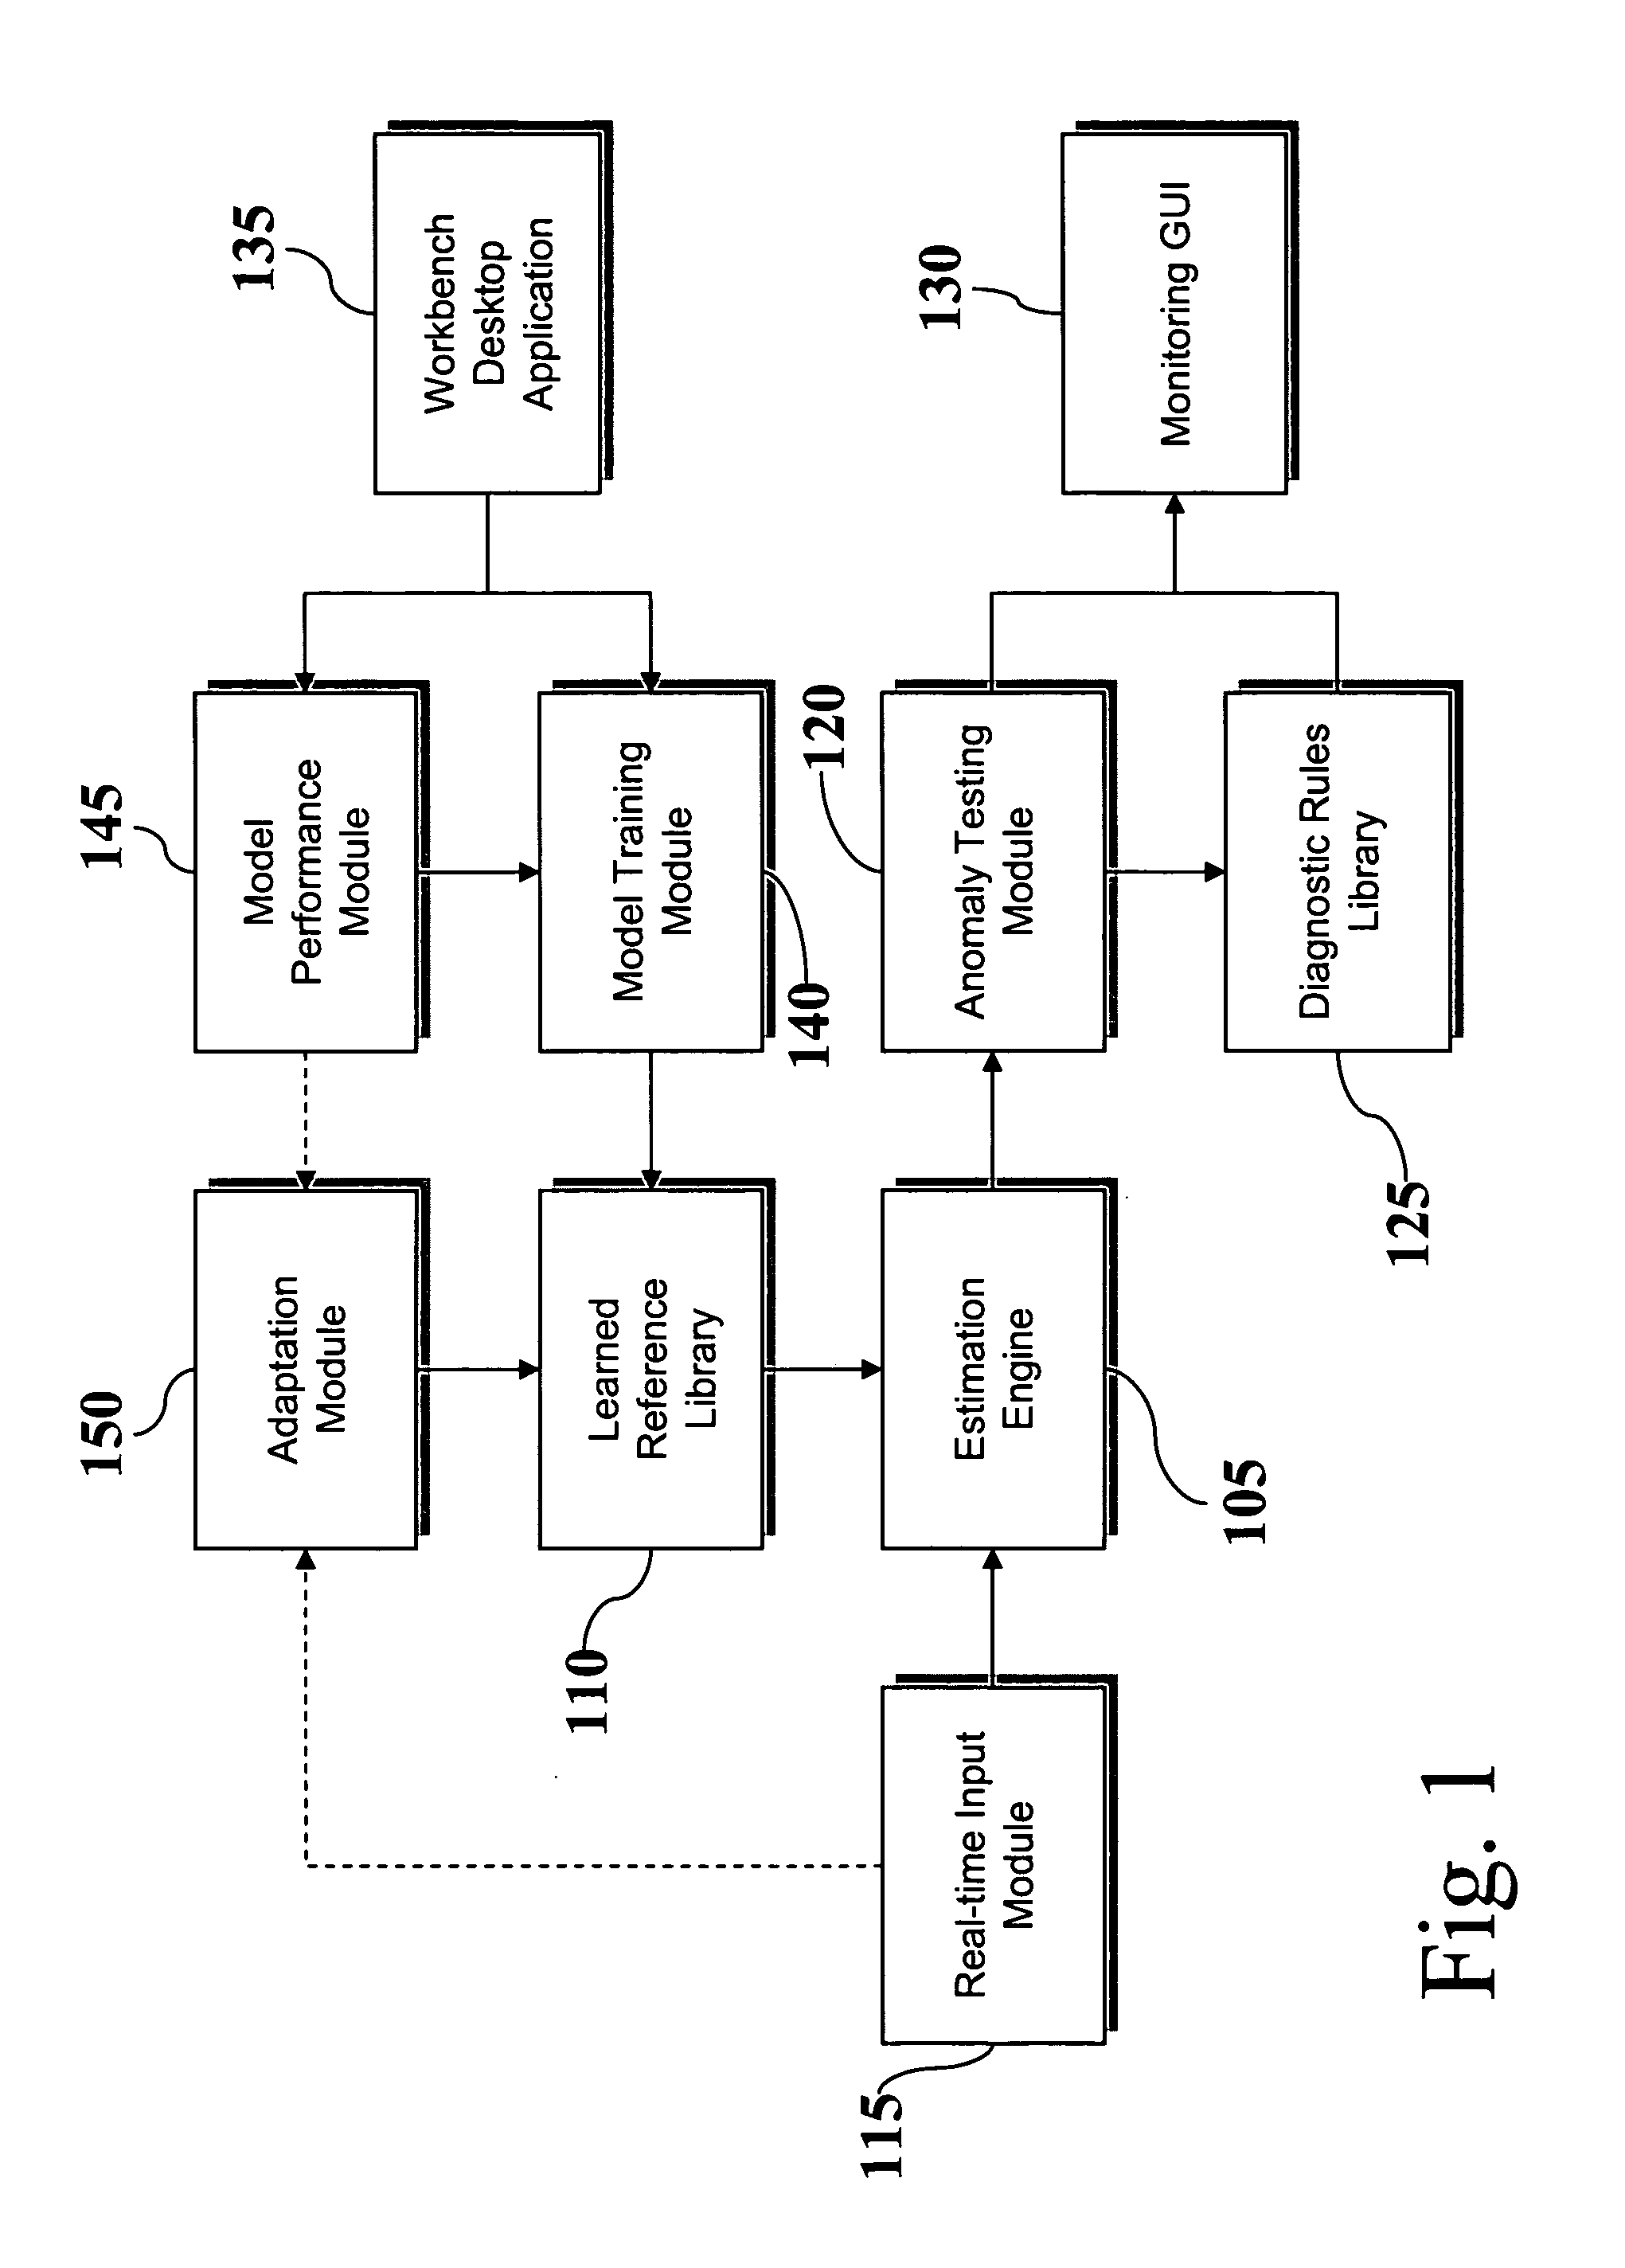 Automated model configuration and deployment system for equipment health monitoring